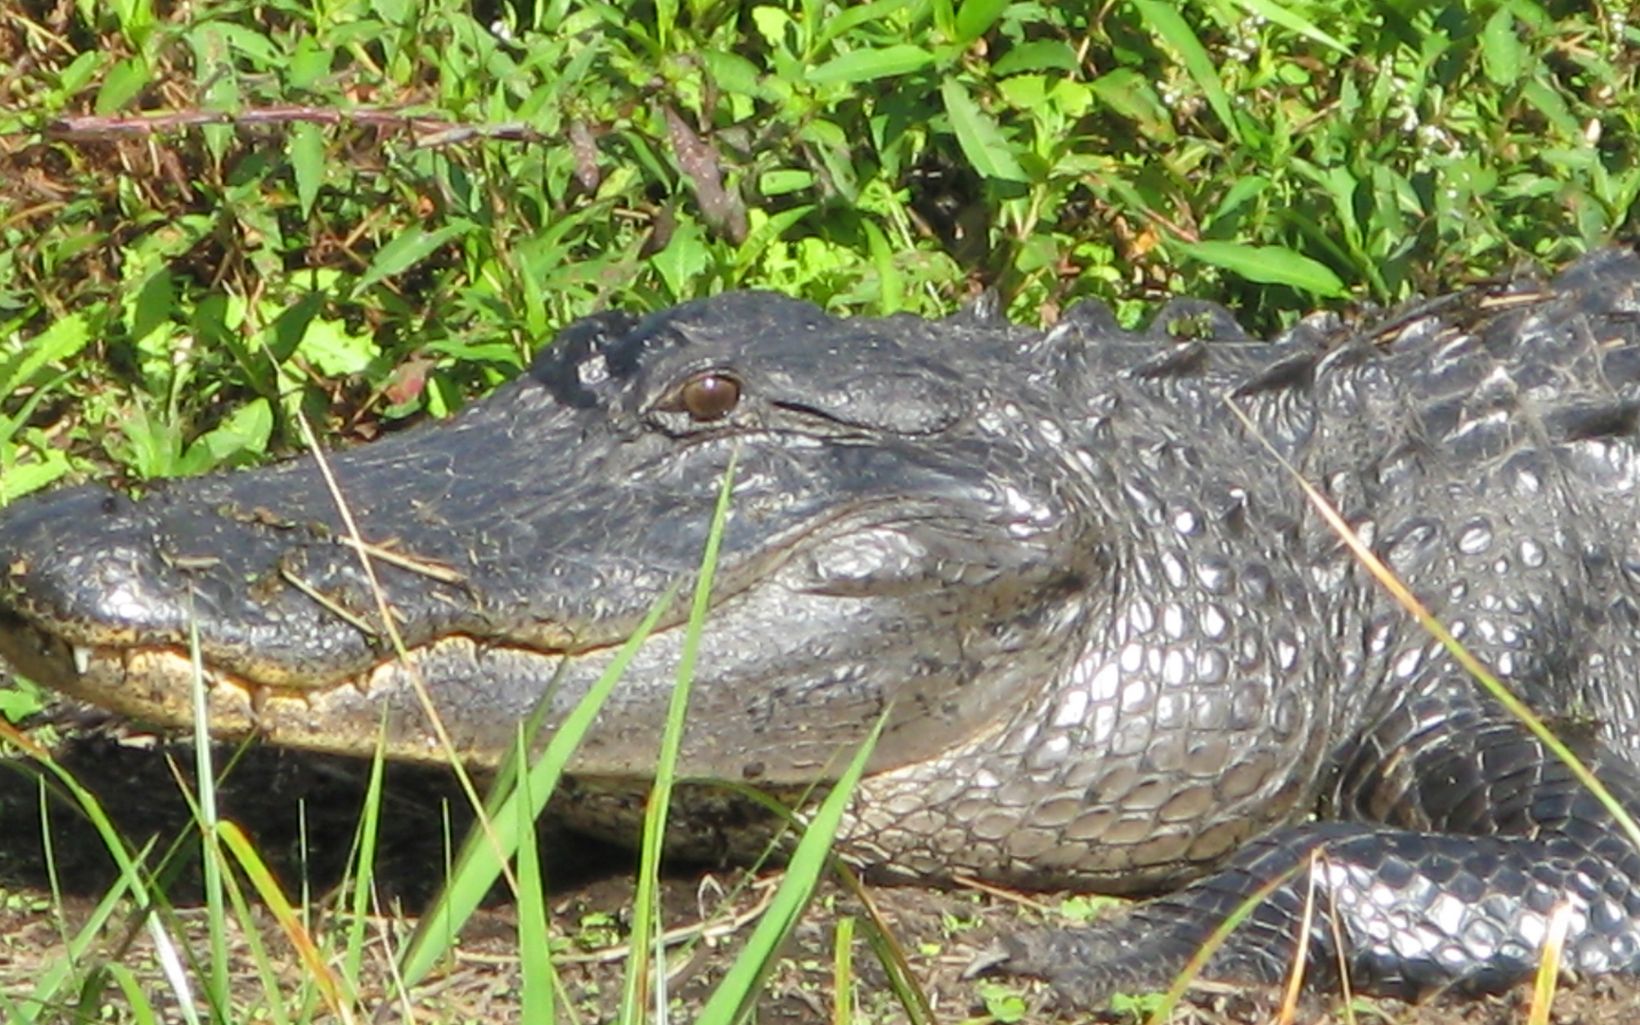 American Alligator Alligators make their home in the wetlands of the ranch.  © Wendy Mathews/TNC